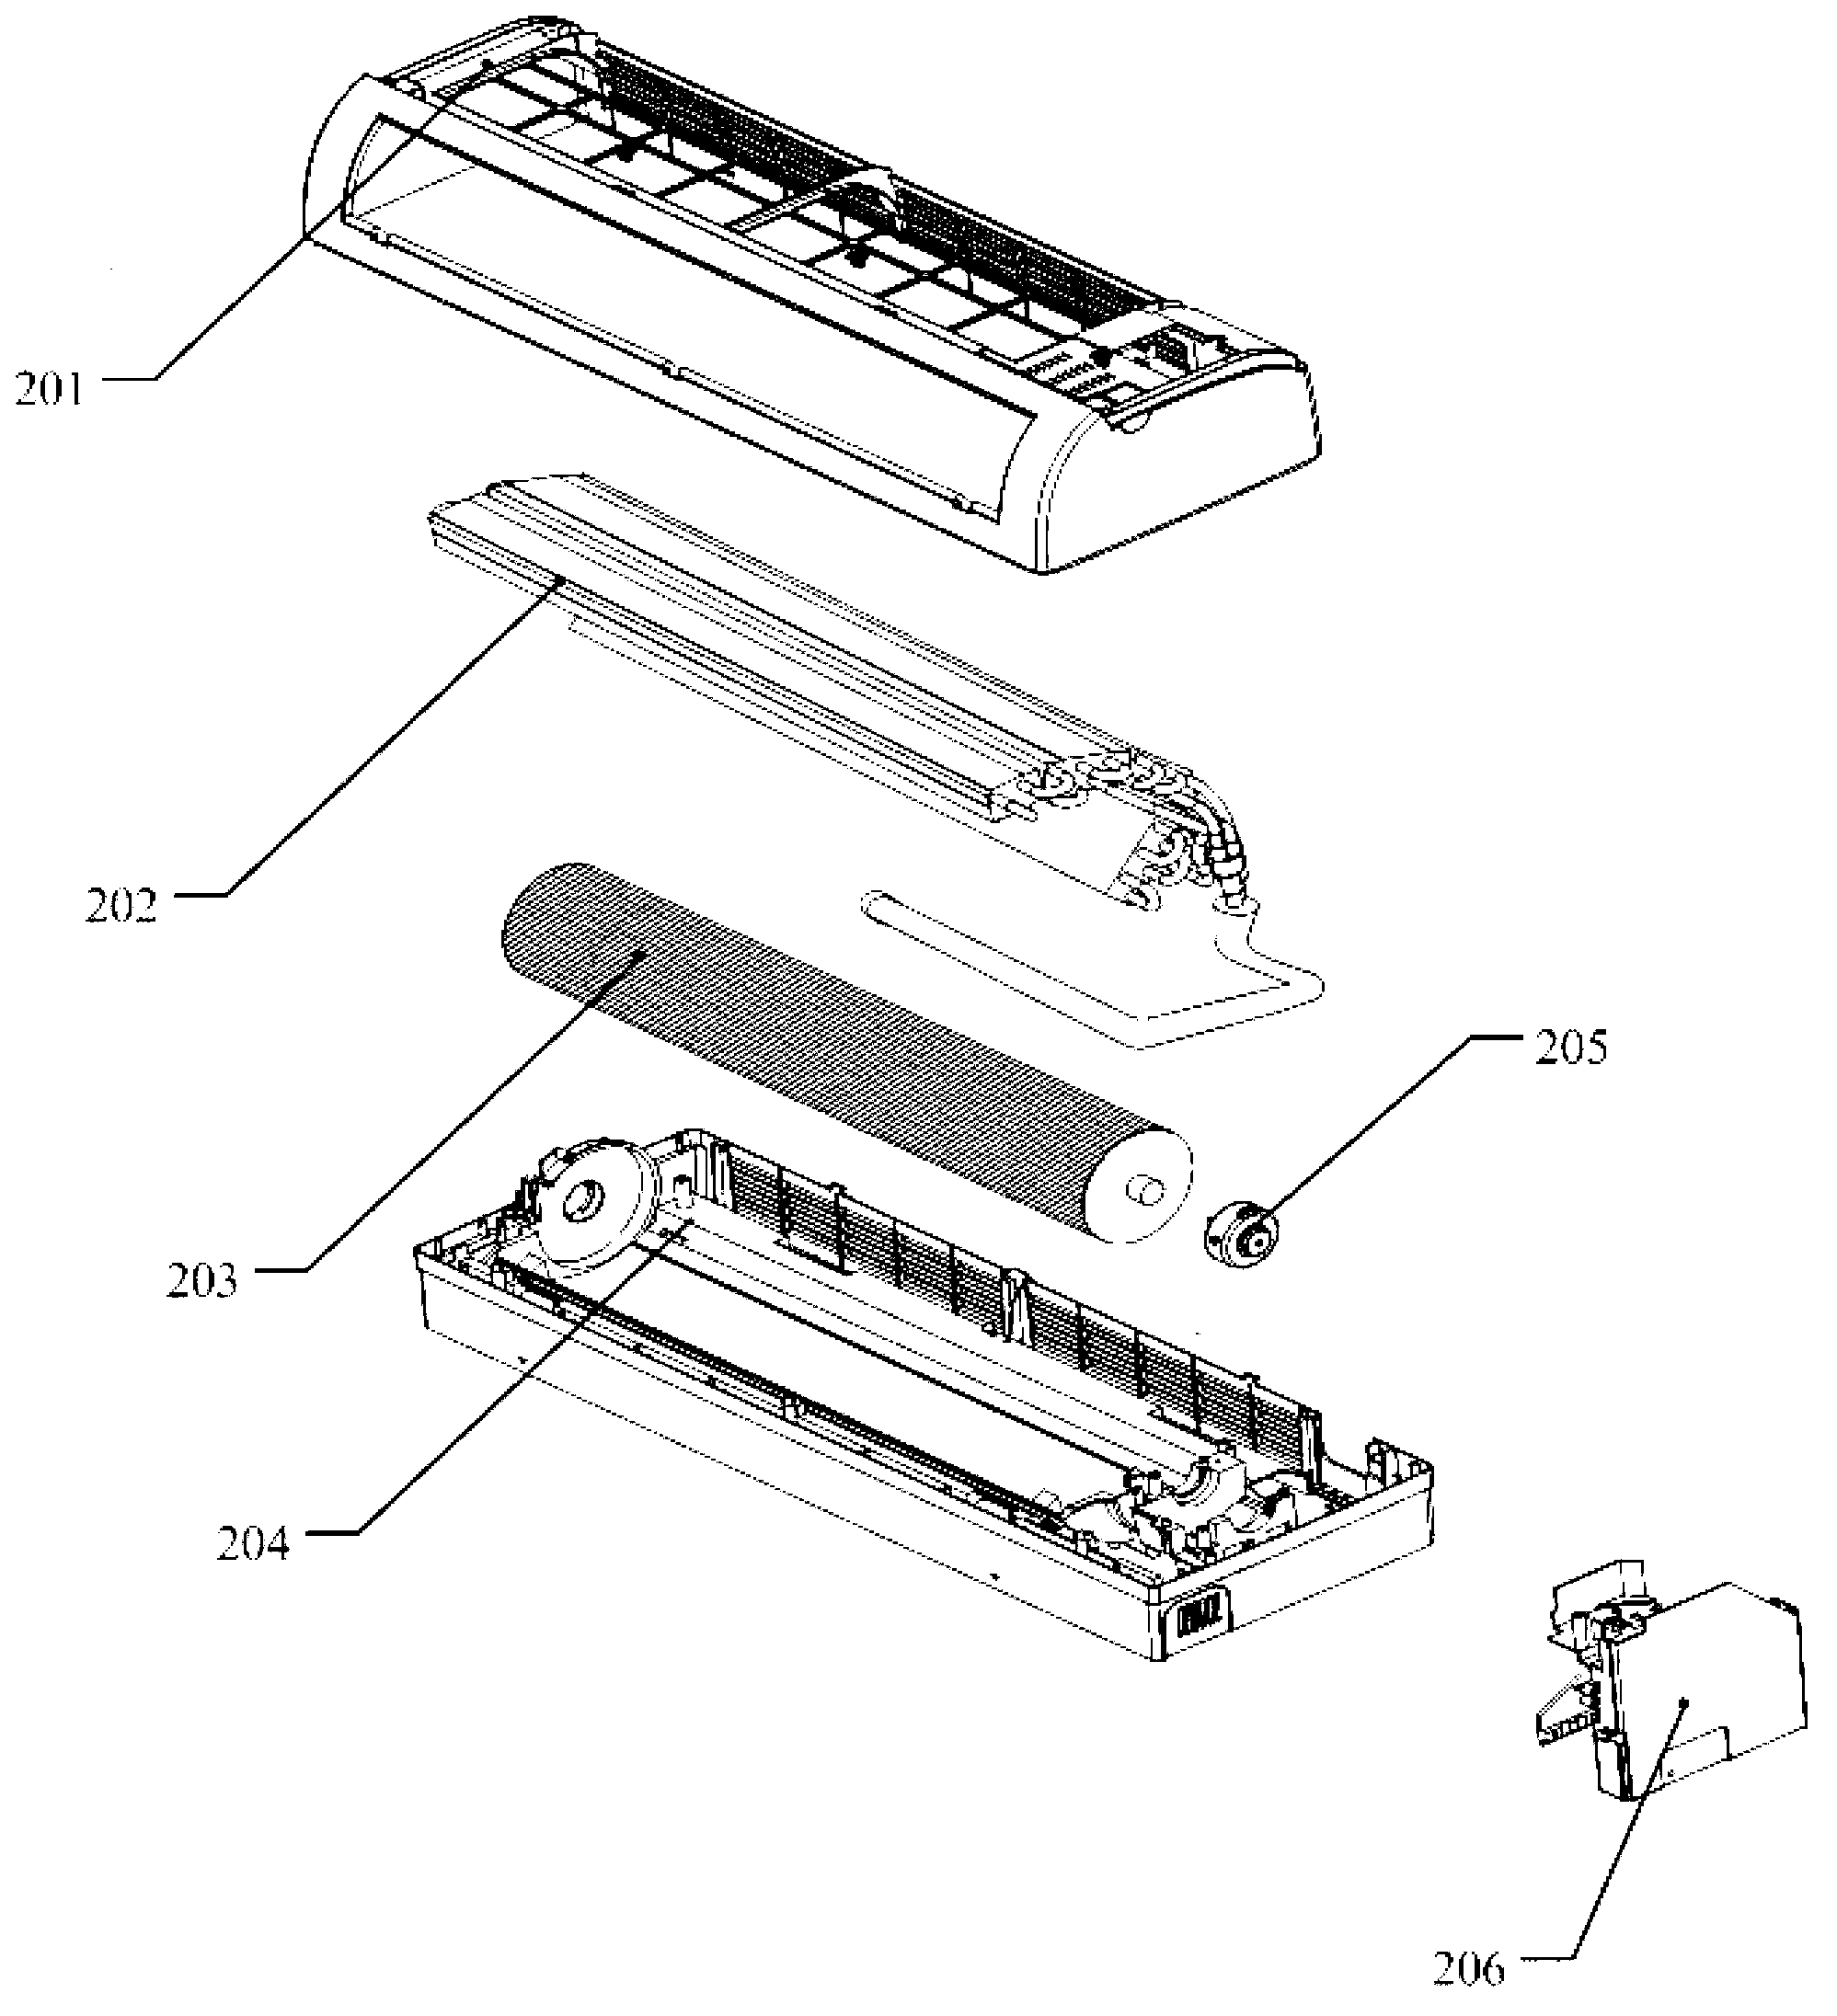 Air-conditioner wind rotor mechanism